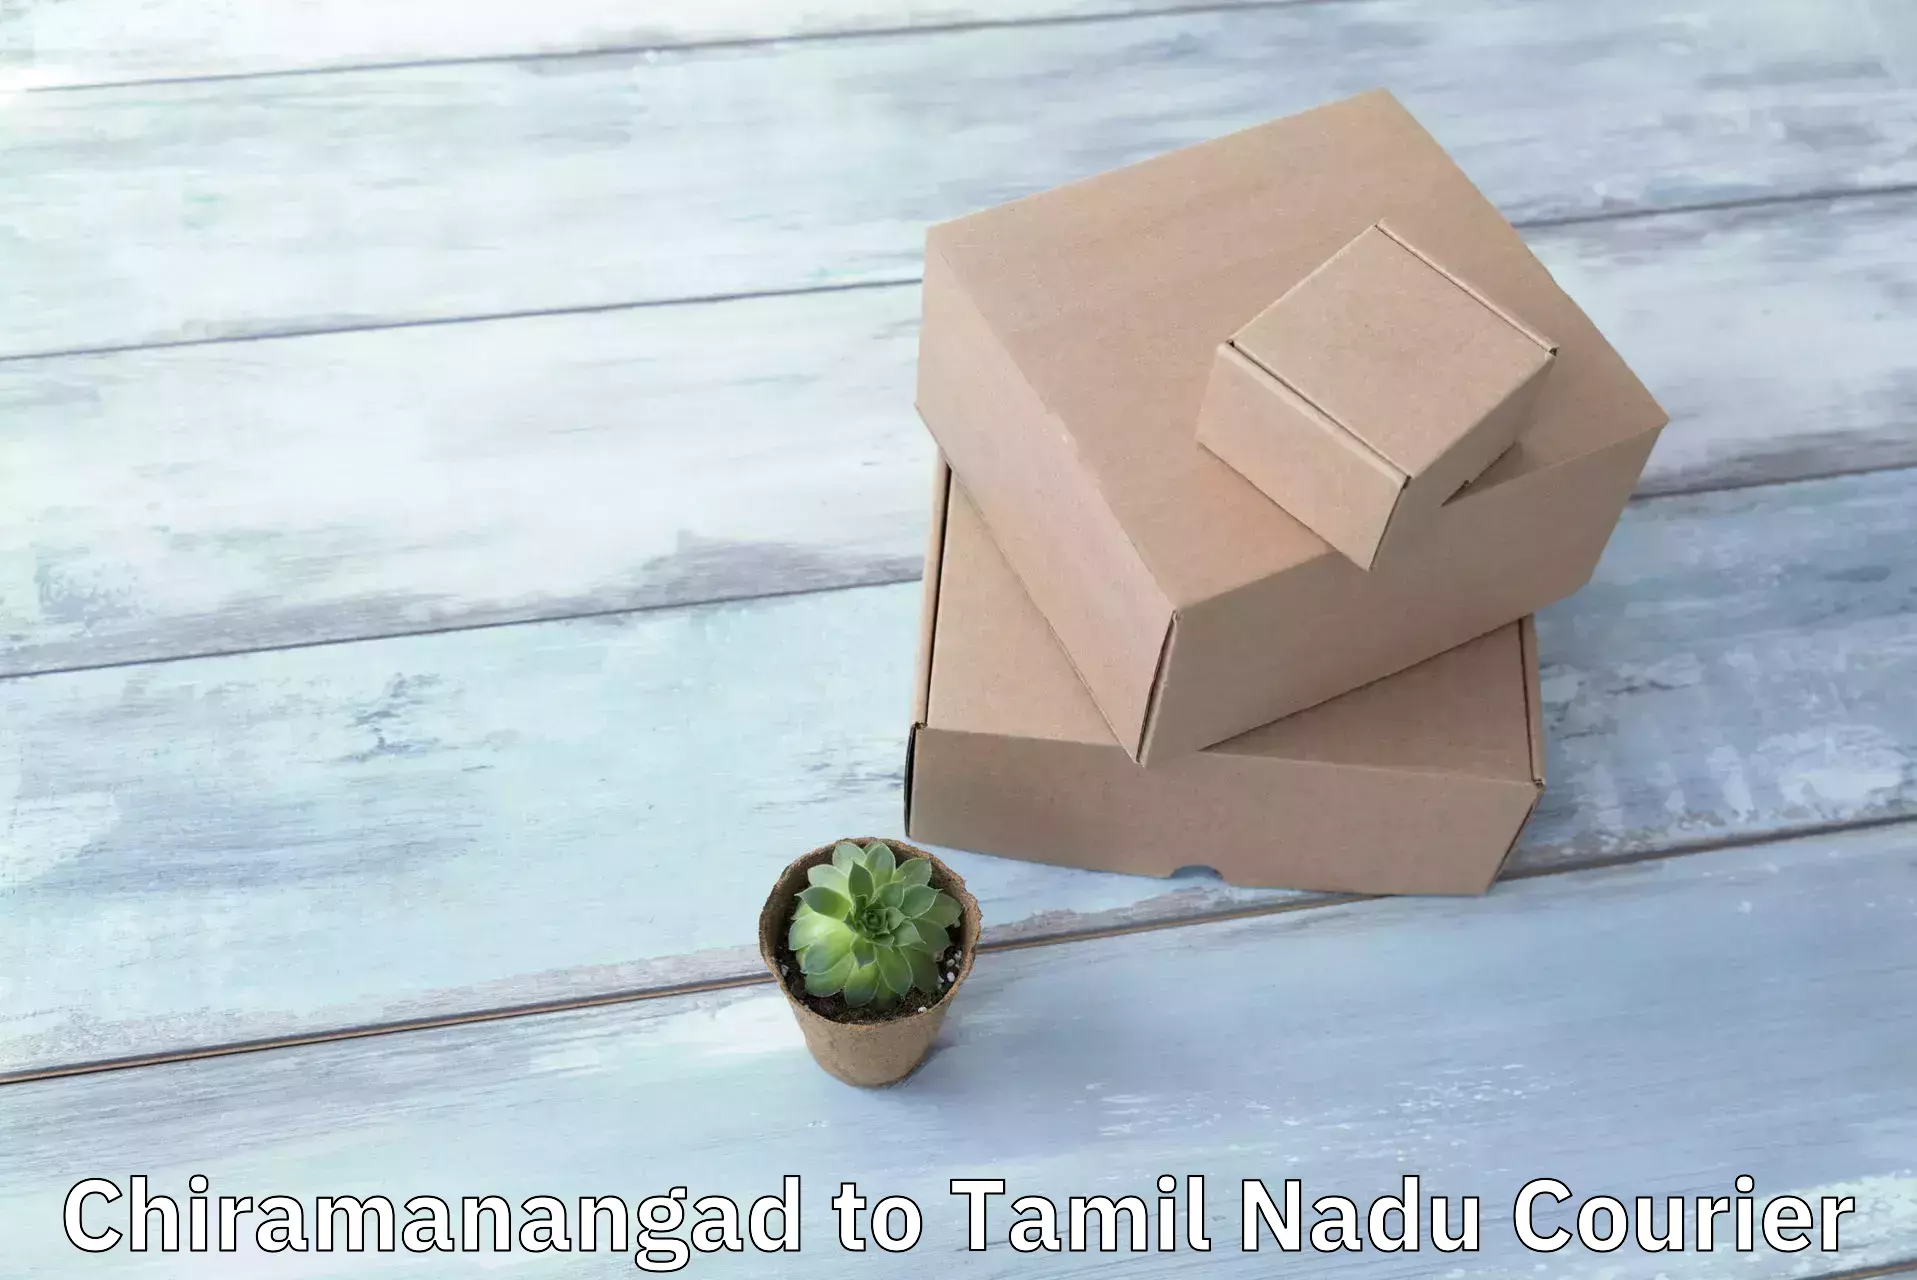 Express delivery capabilities Chiramanangad to Tamil Nadu